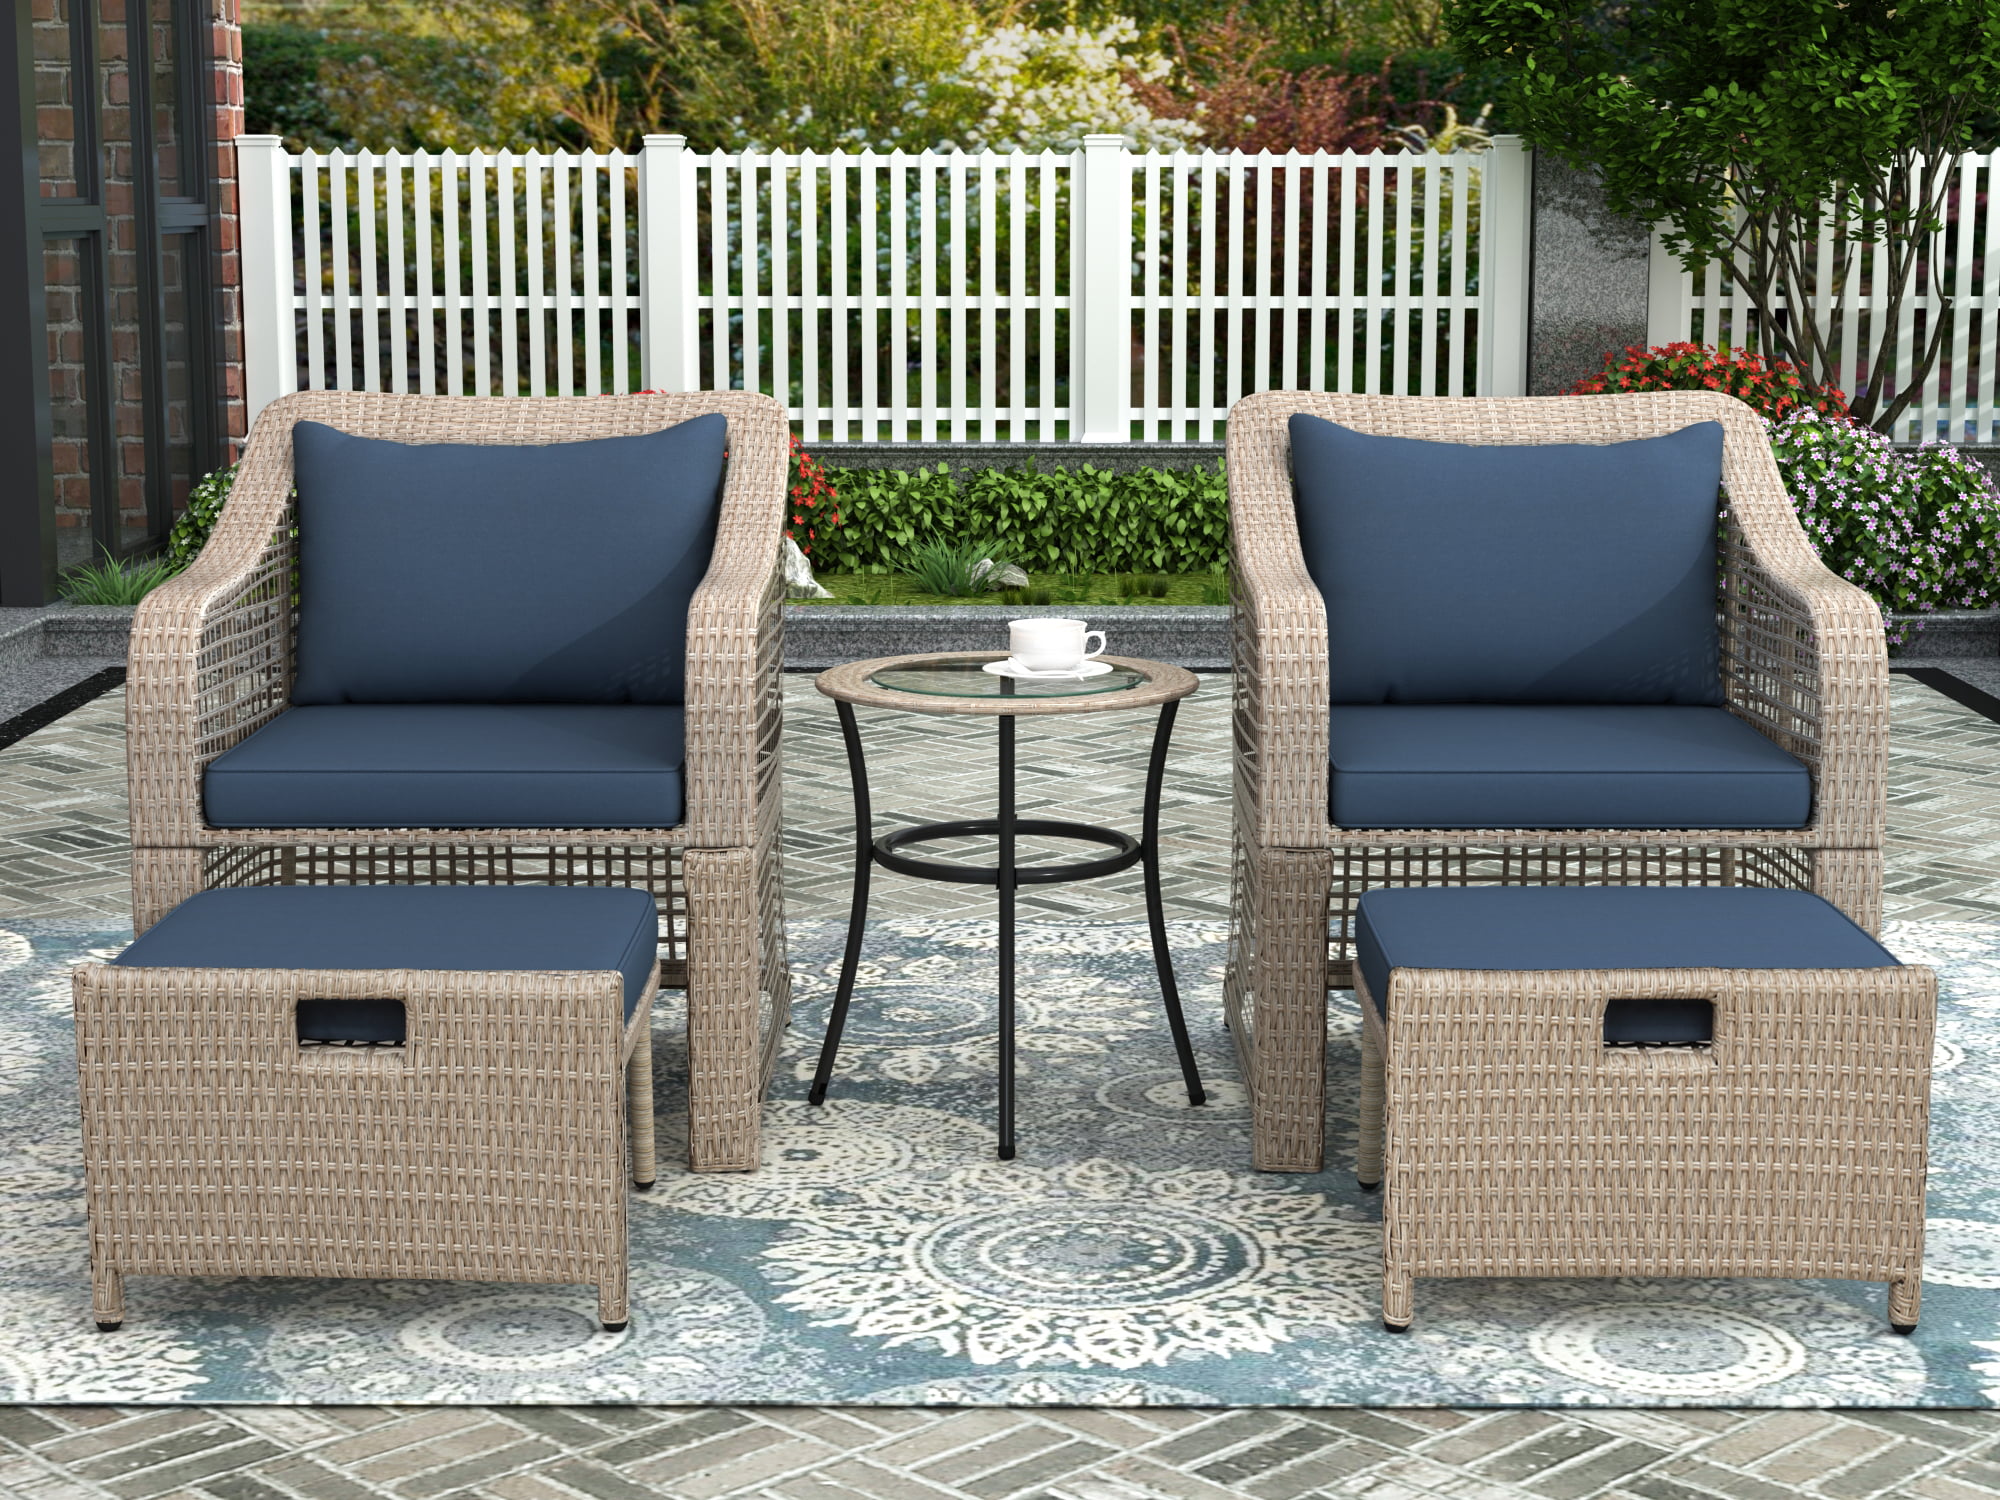 HONBAY 5 PCS Wicker Patio Bistro Set Outdoor Patio Chairs Set with Ottoman Footrest and Storage Table for Garden Beige